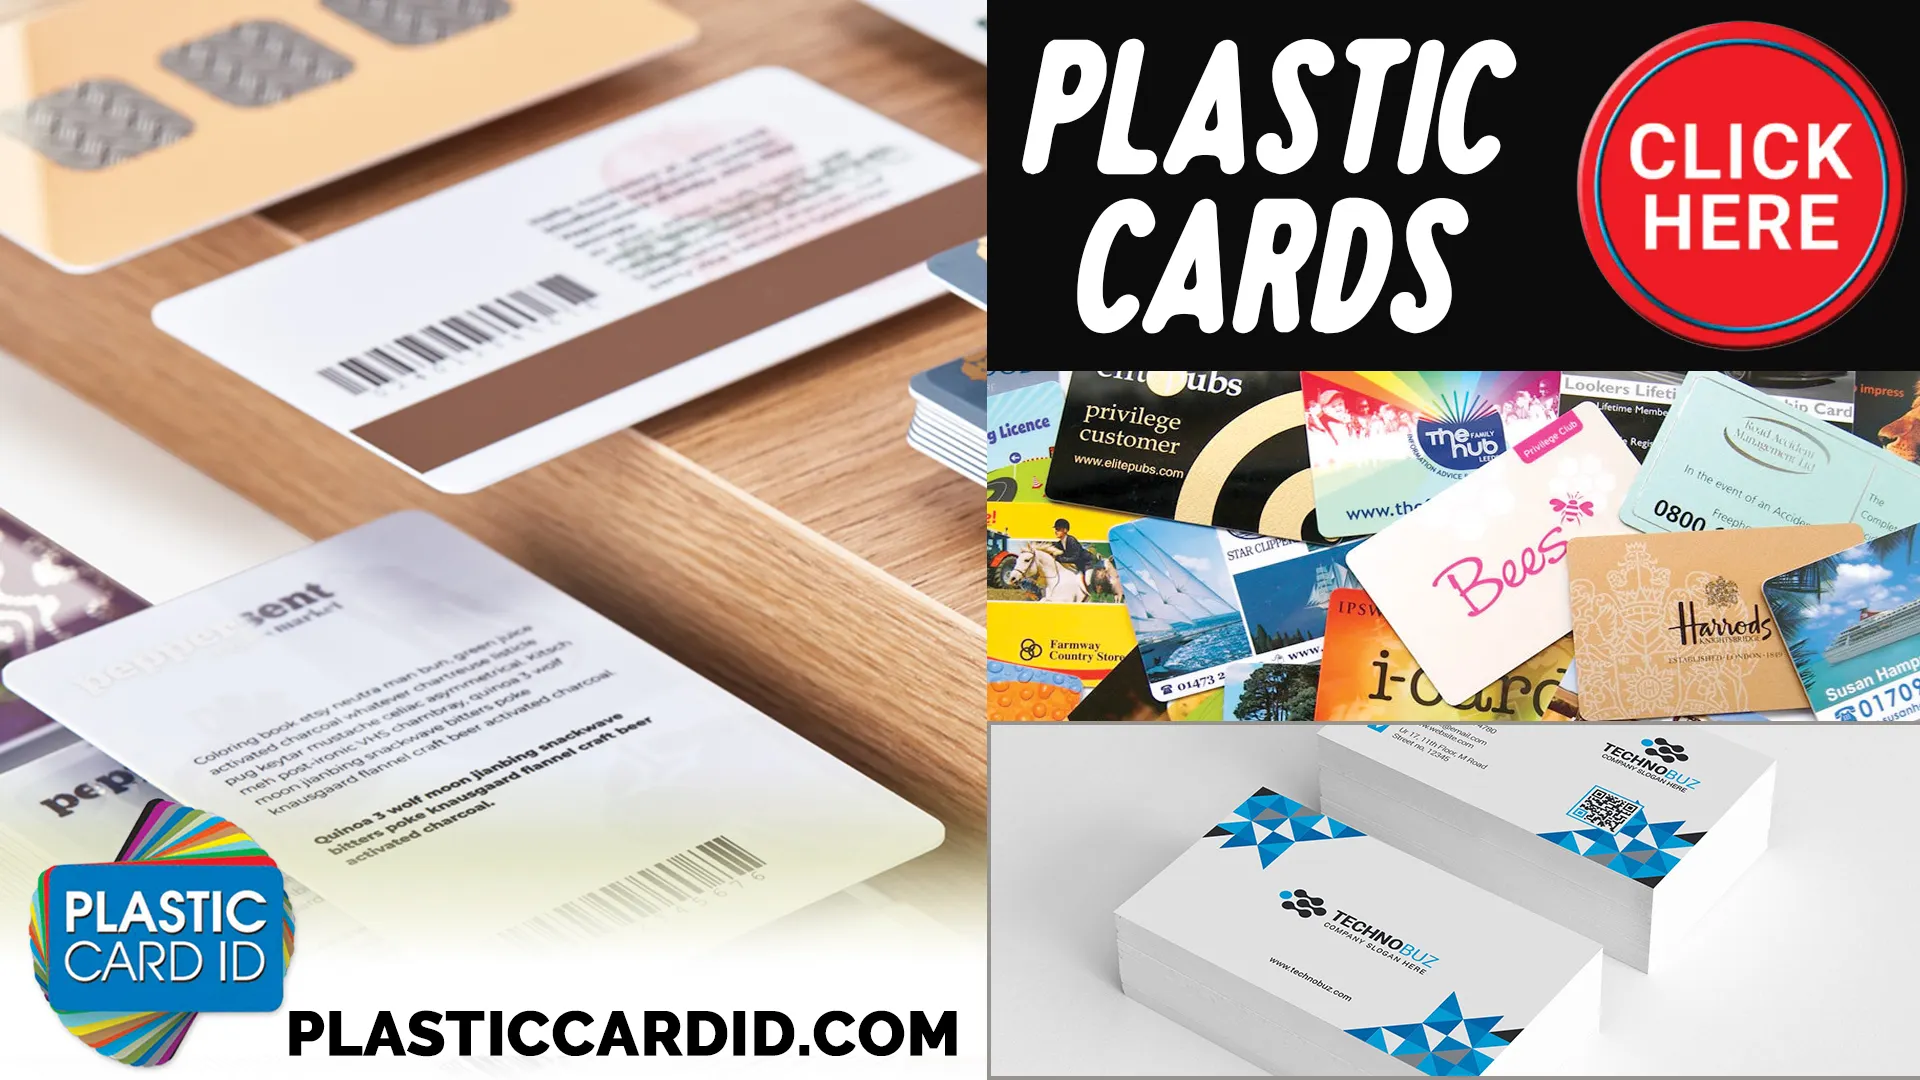 Why Choose Plastic Cards?